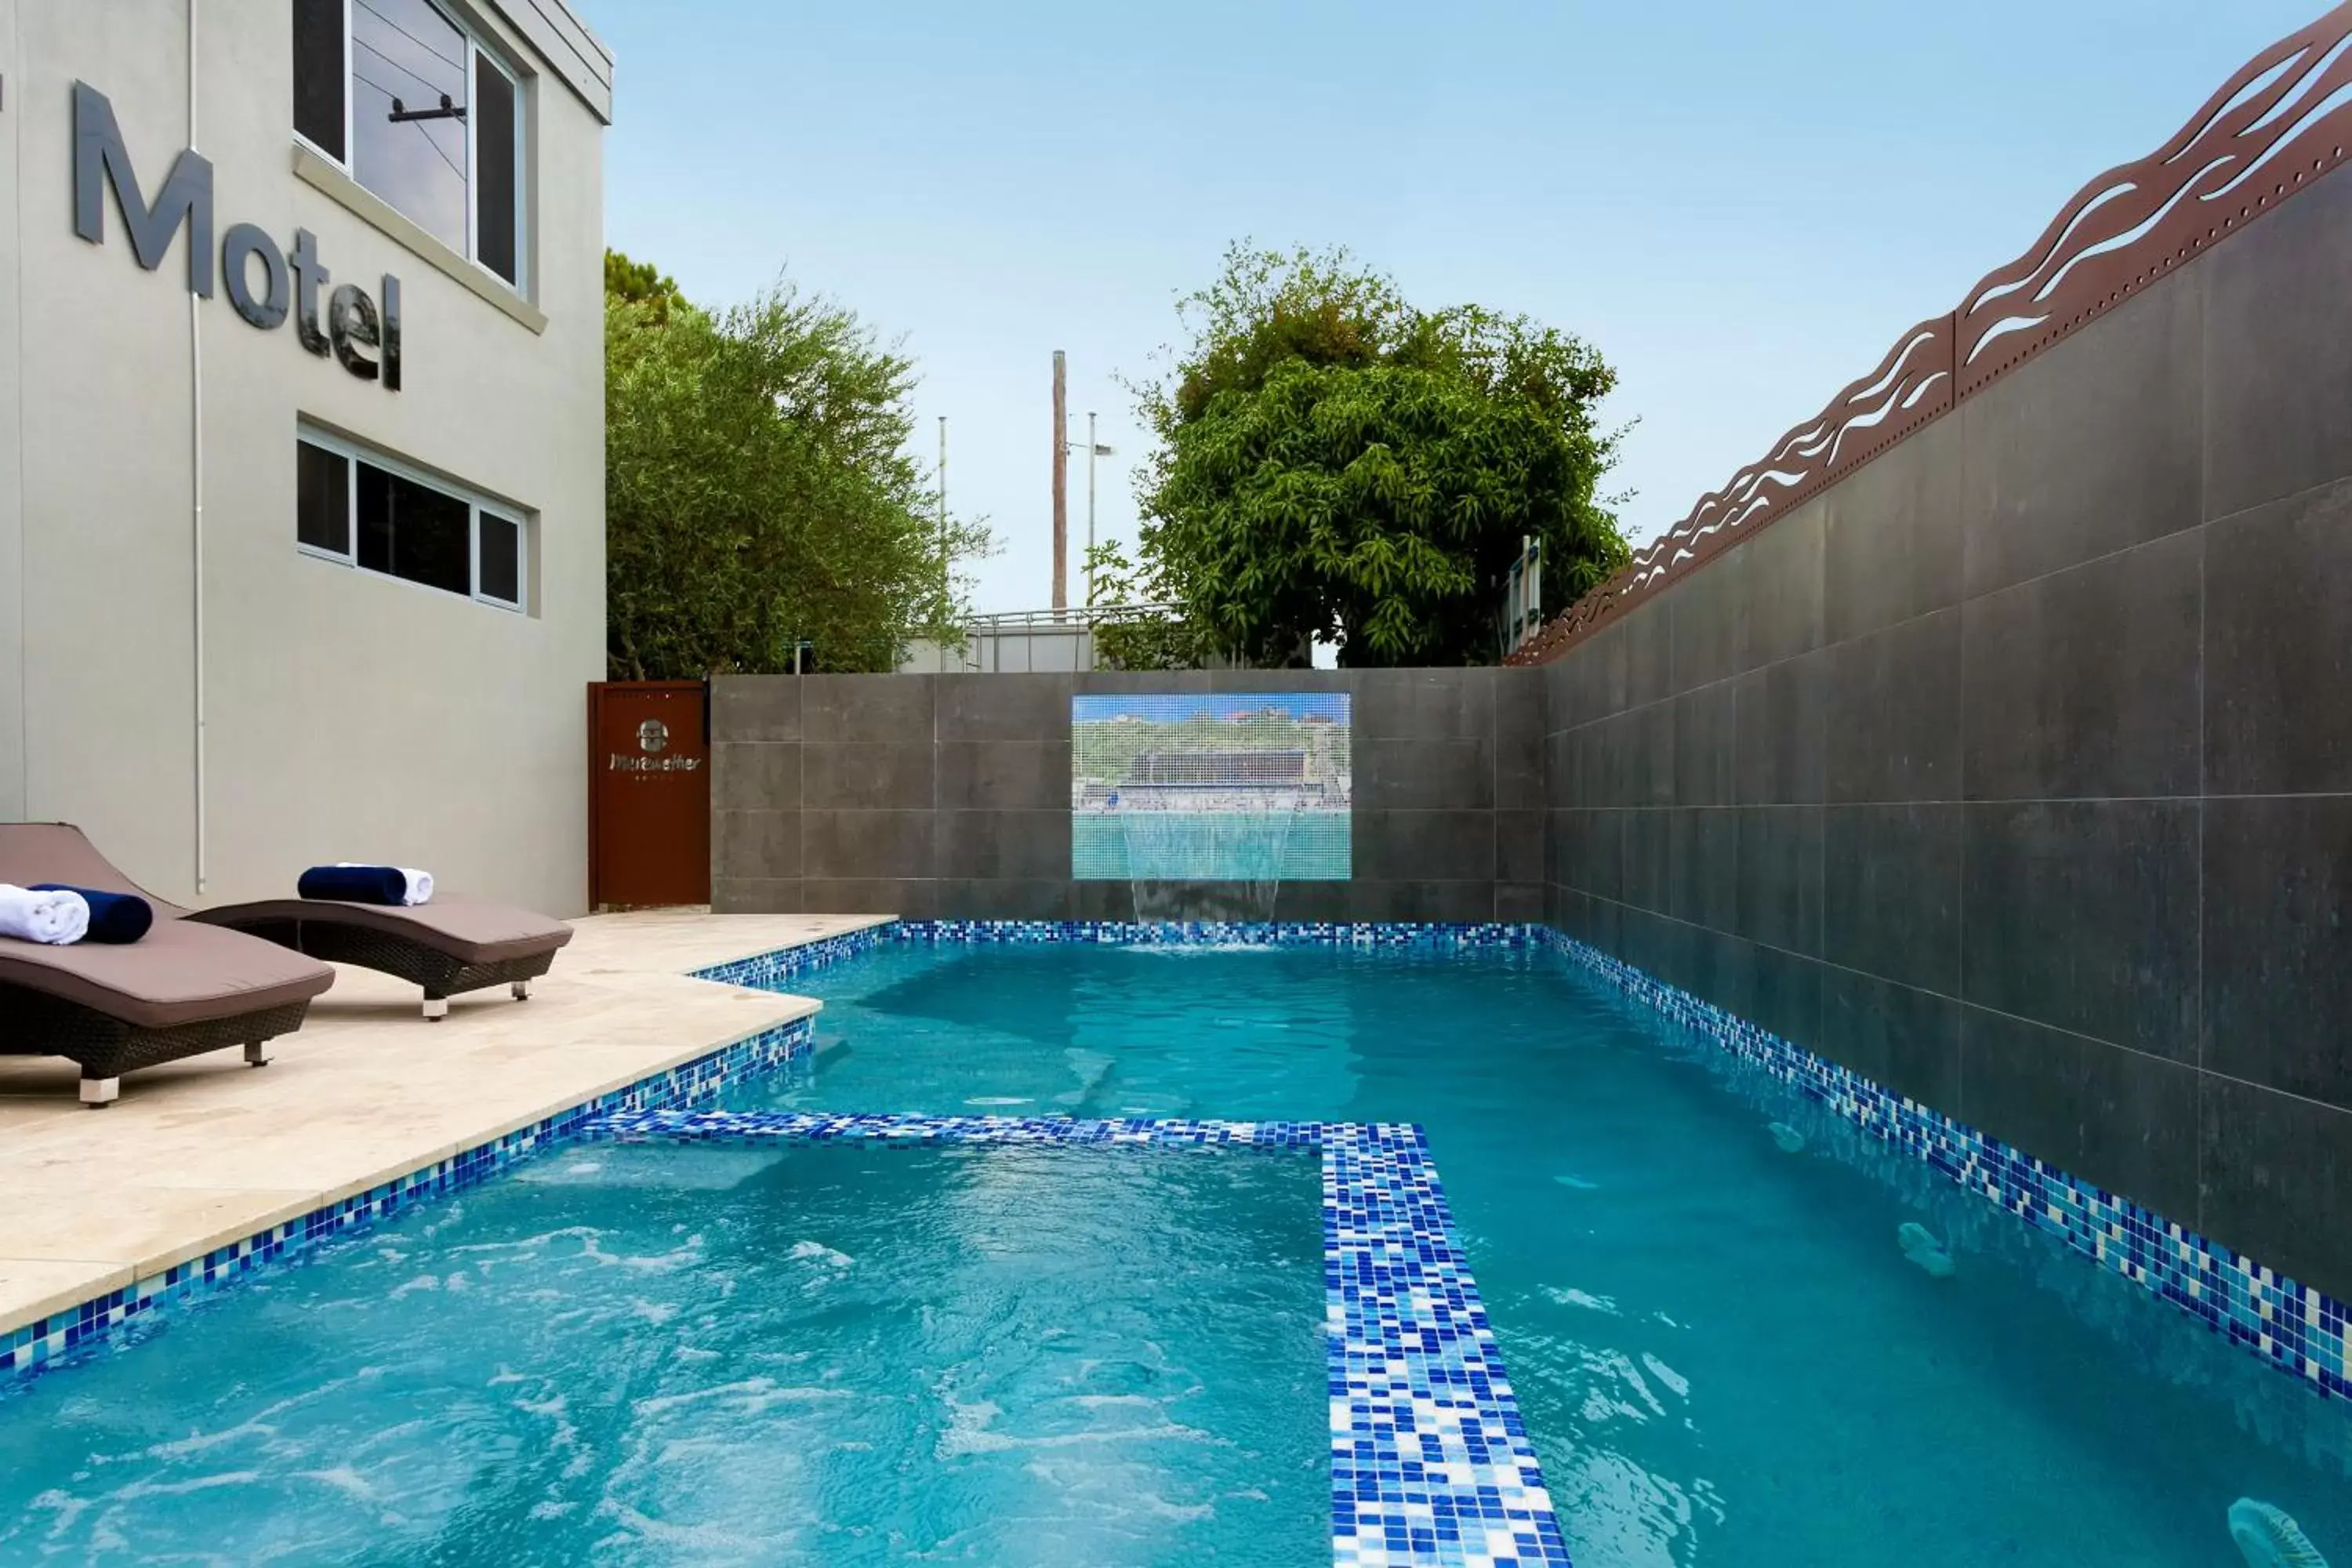 Swimming Pool in Merewether Motel